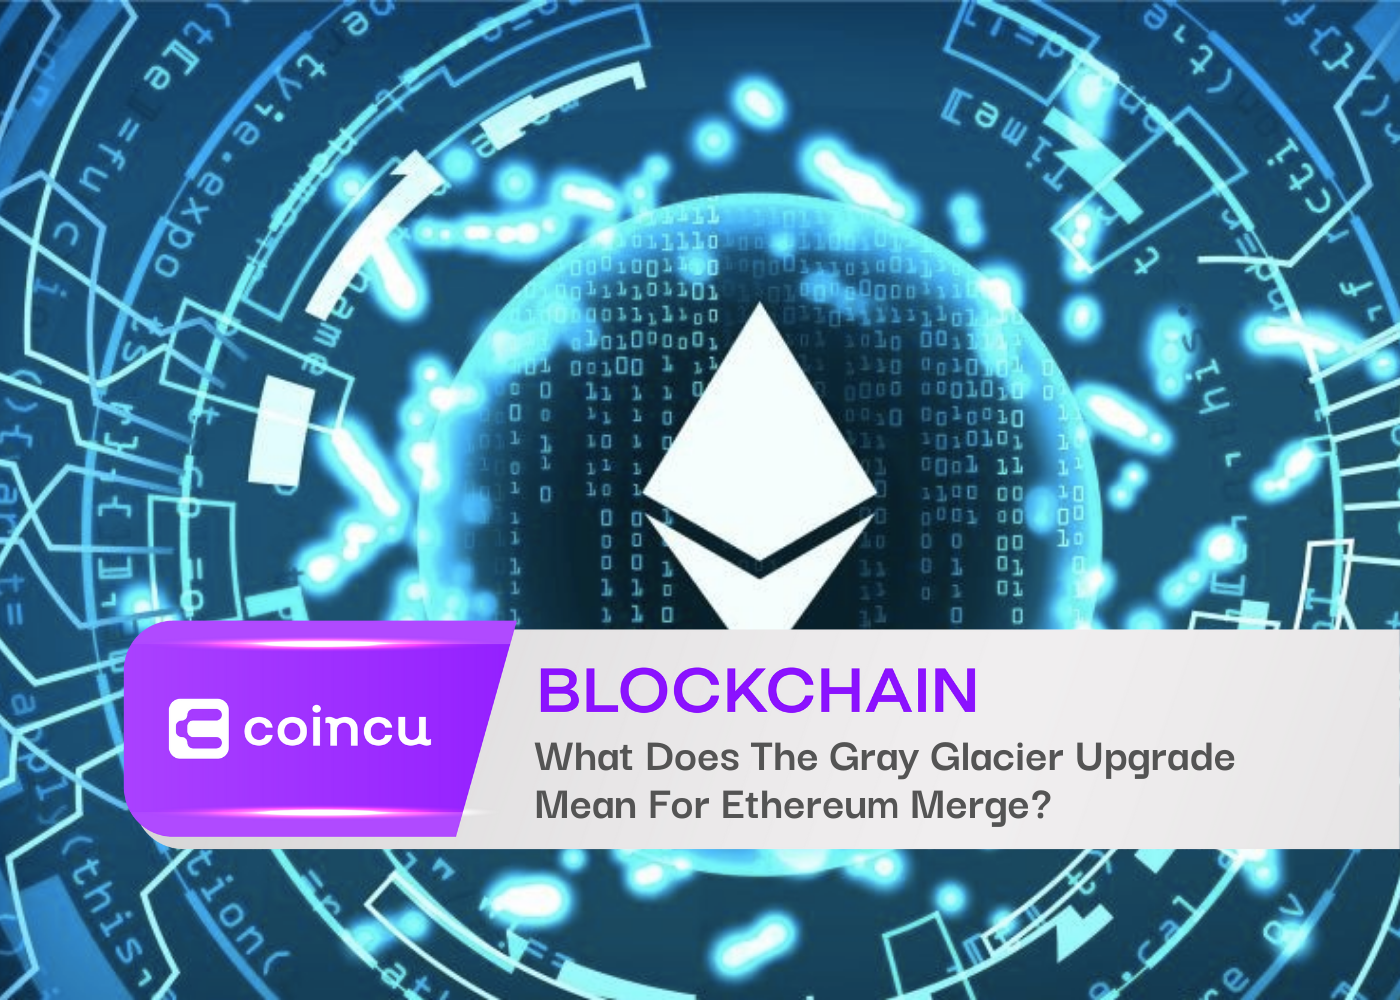 What Does The Gray Glacier Upgrade Mean For Ethereum Merge?